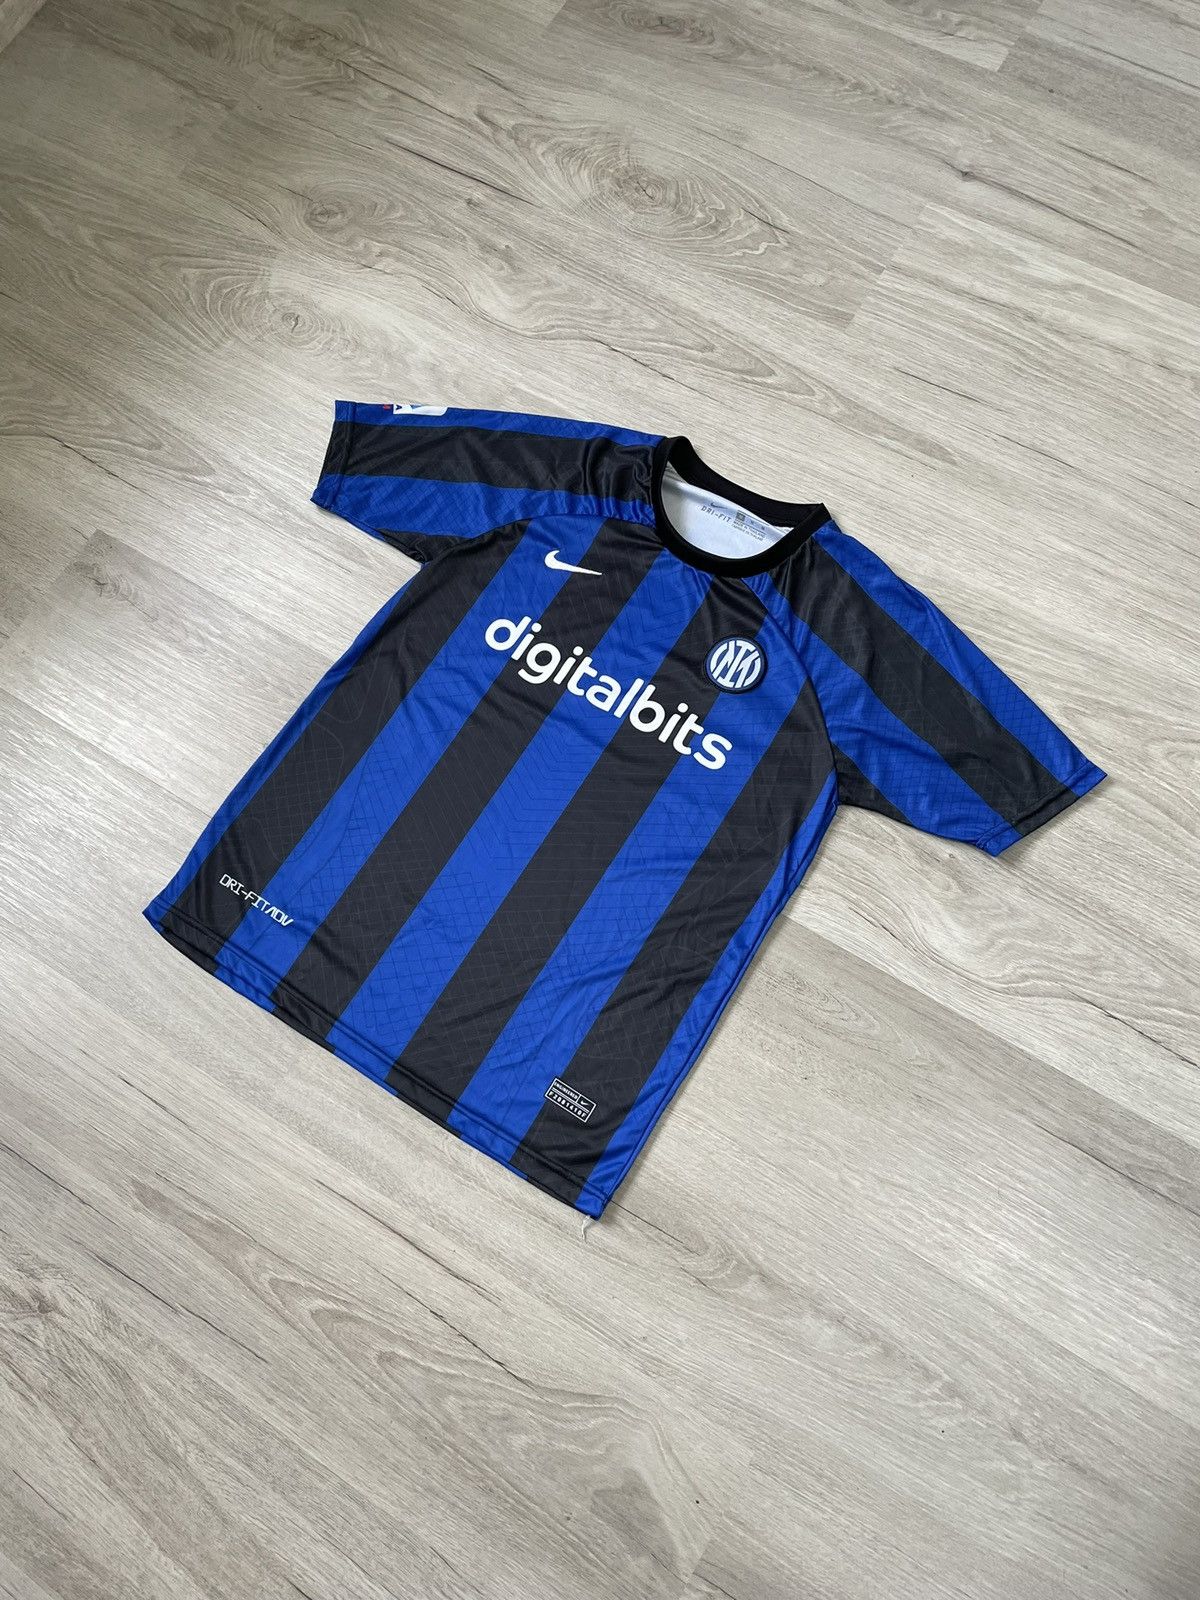 Pre-owned Nike Men's Football Shirts Inter Milan Home In Blue